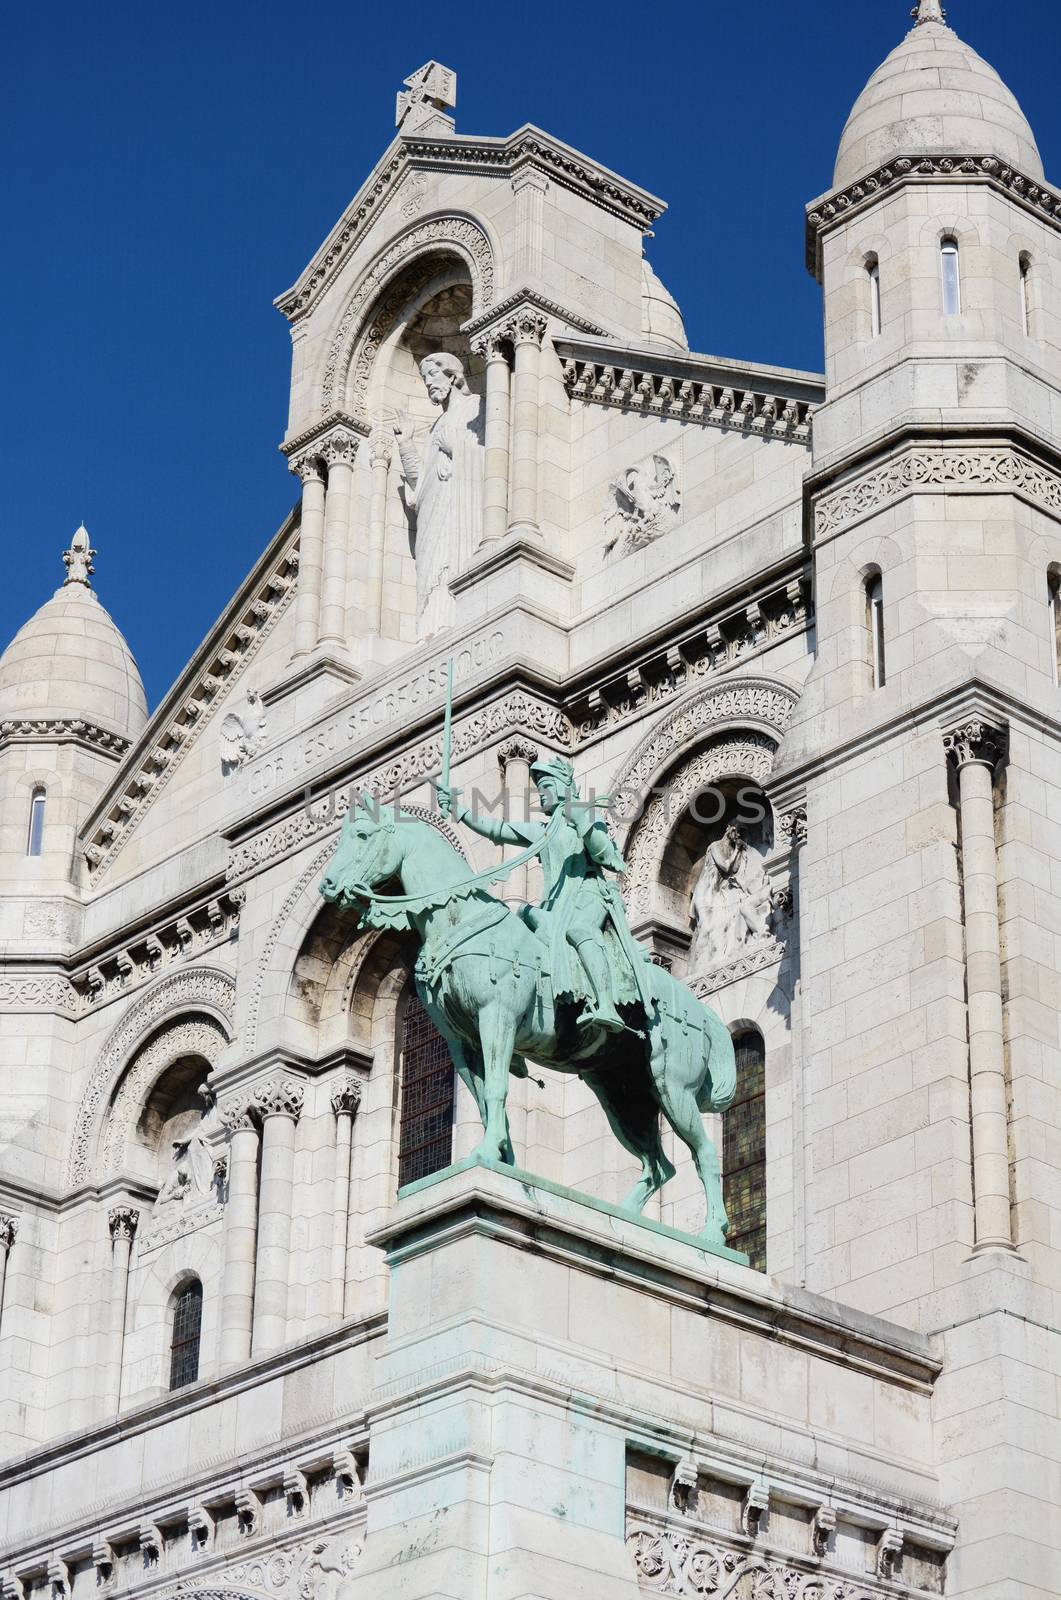 Joan of Arc bronze equestrian statue on the facade of the Sacre Coeur basilica, with the limestone architecture of the church beyond